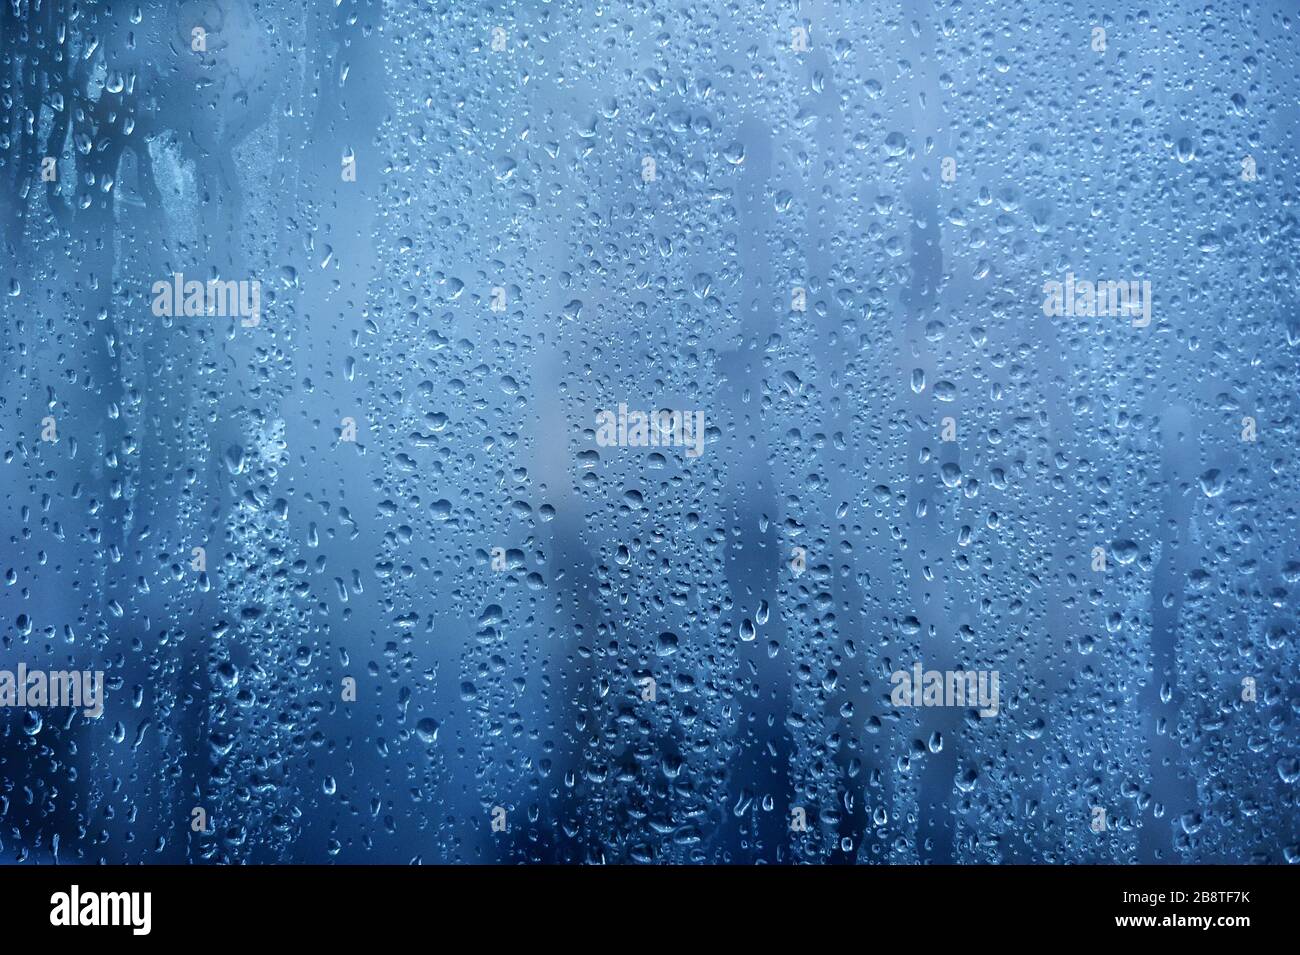 Rainy background, rain water drops on the window or in shower stall, autumn season backdrop, abstract textured wallpaper Stock Photo